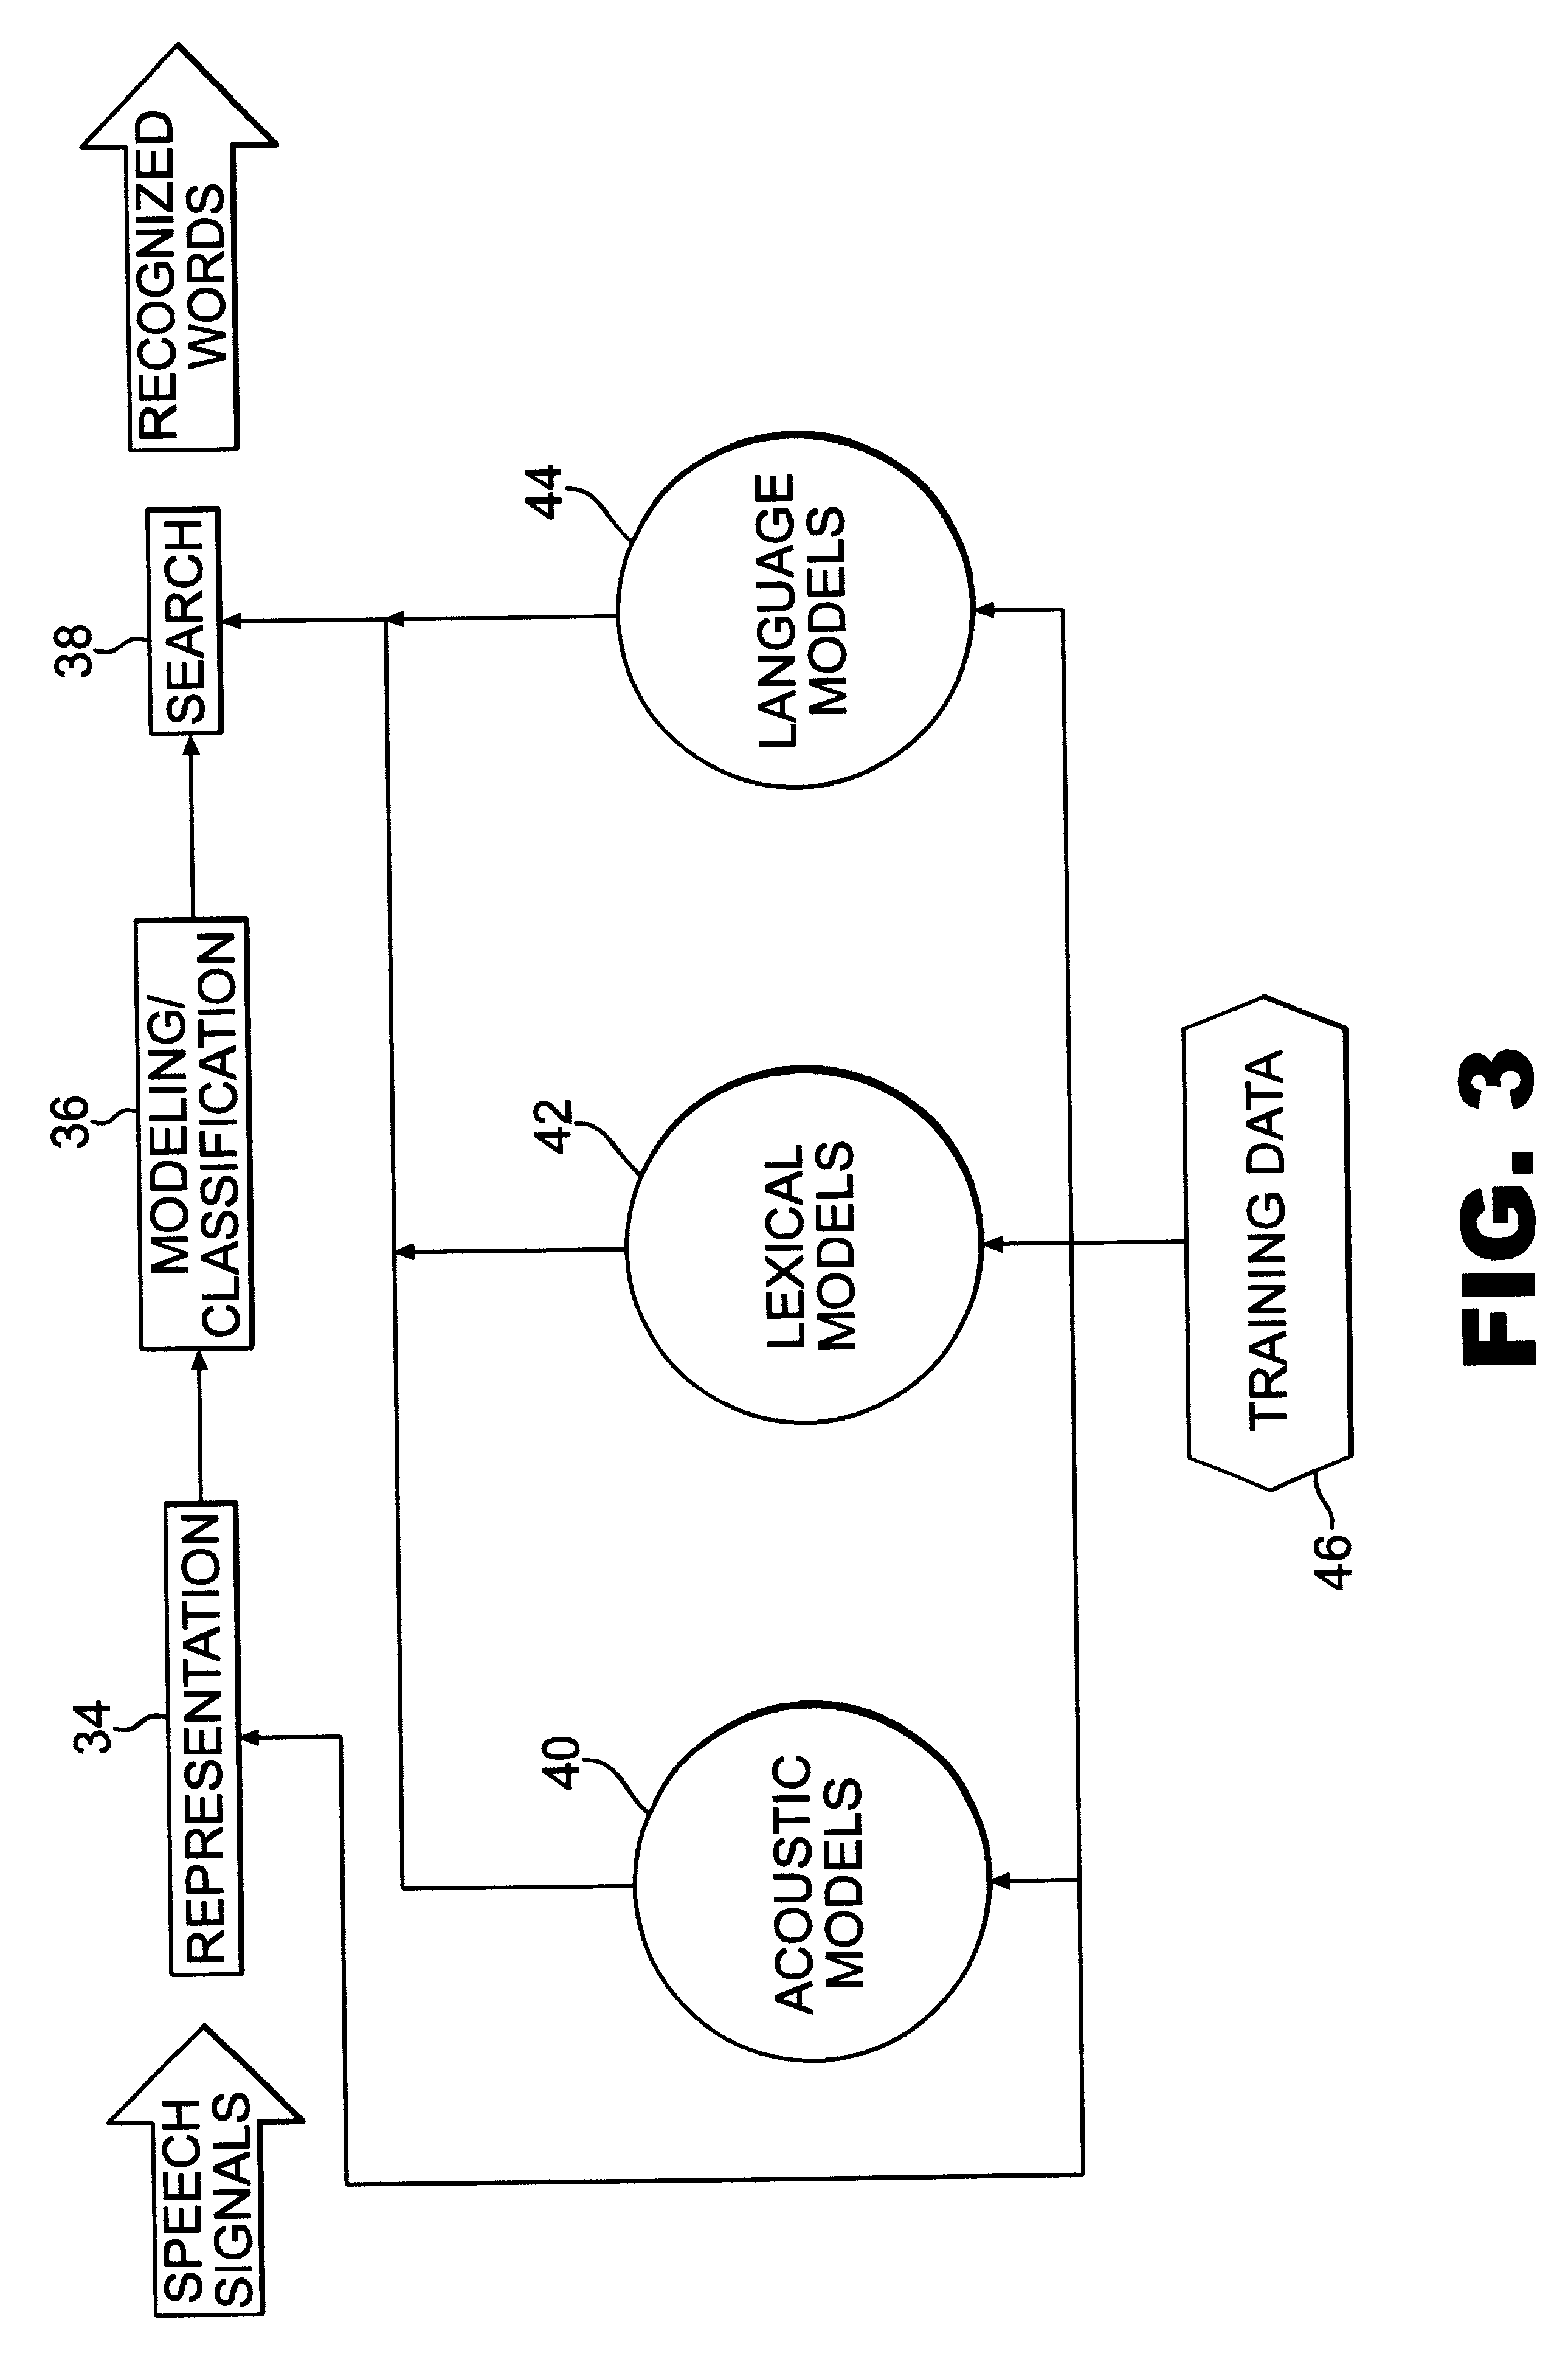 Method and system for determining available and alternative speech commands